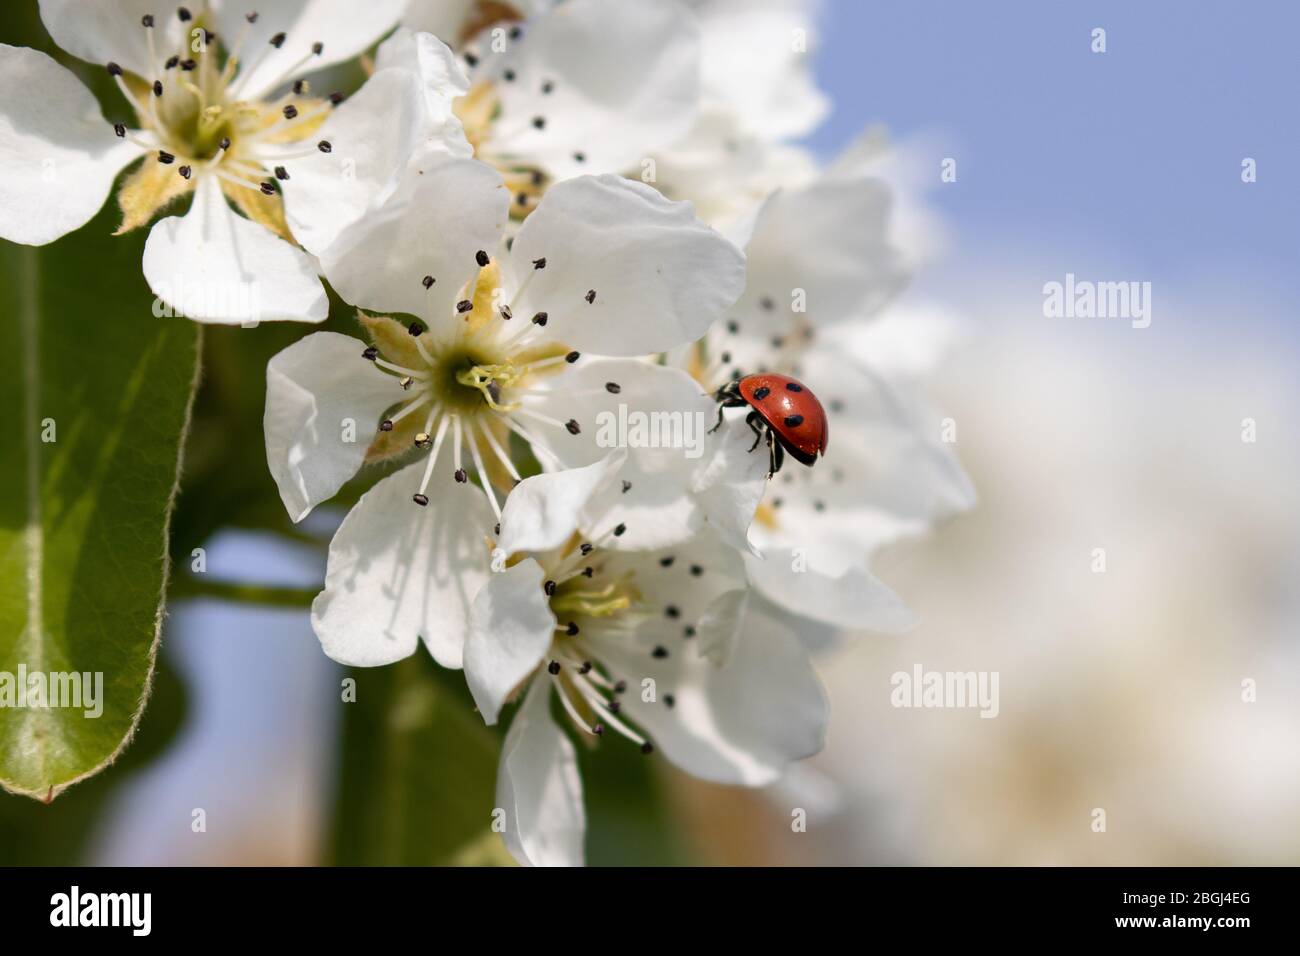 A ladybird climbing on delicate blossom in the spring sunshine Stock Photo